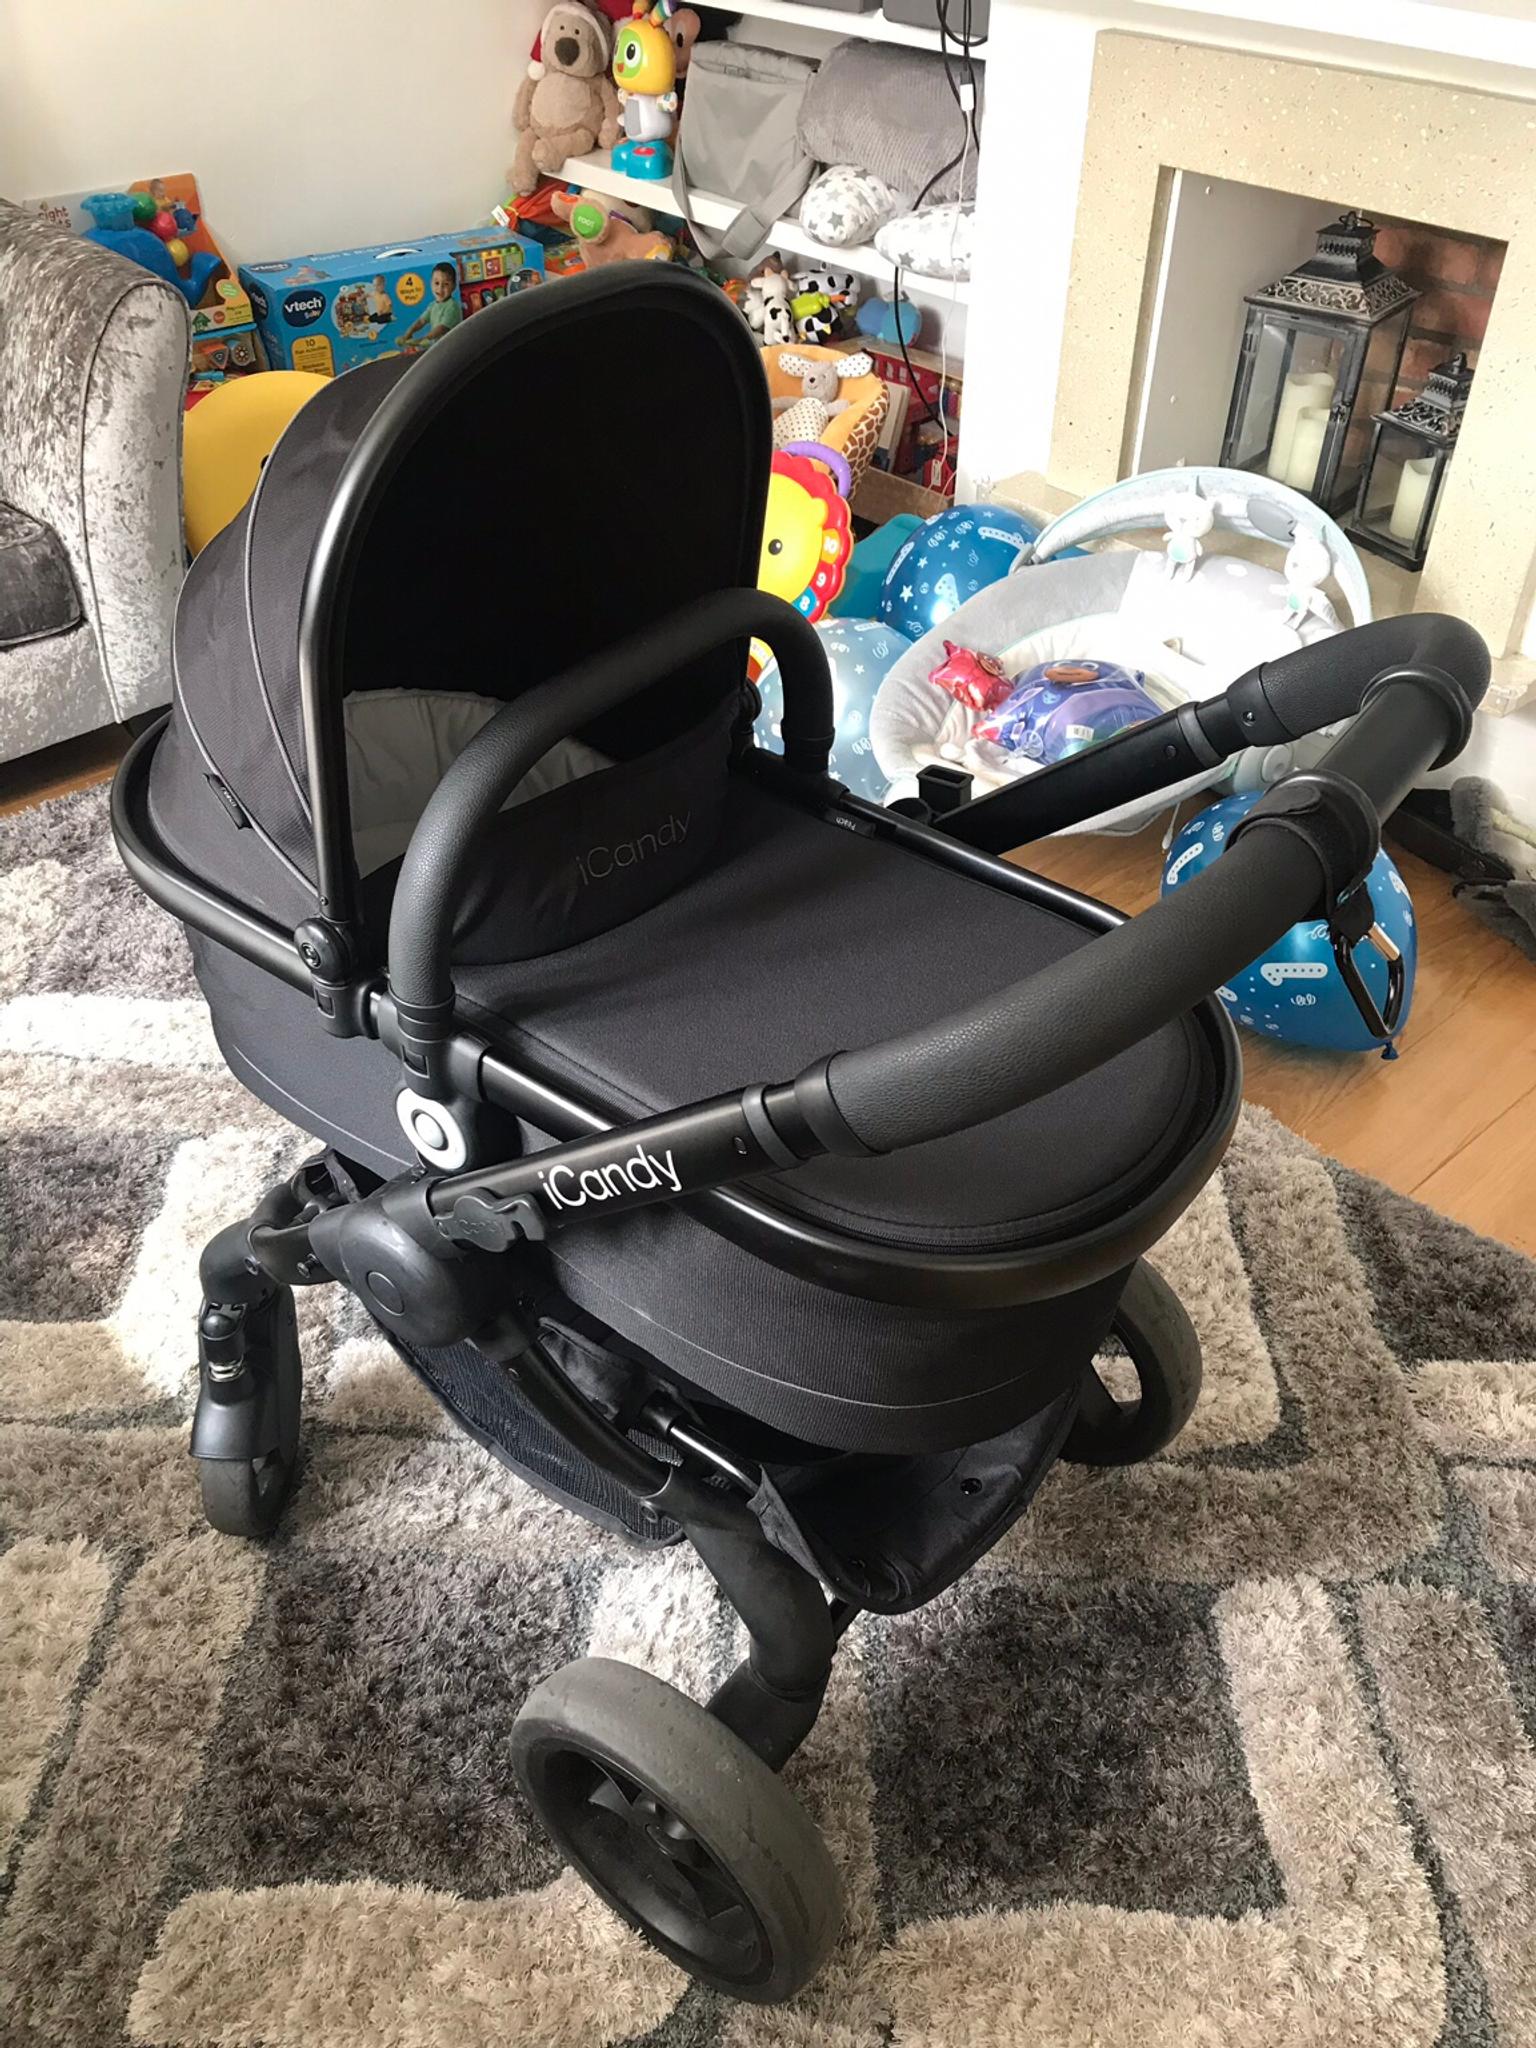 icandy peach jet 2 review